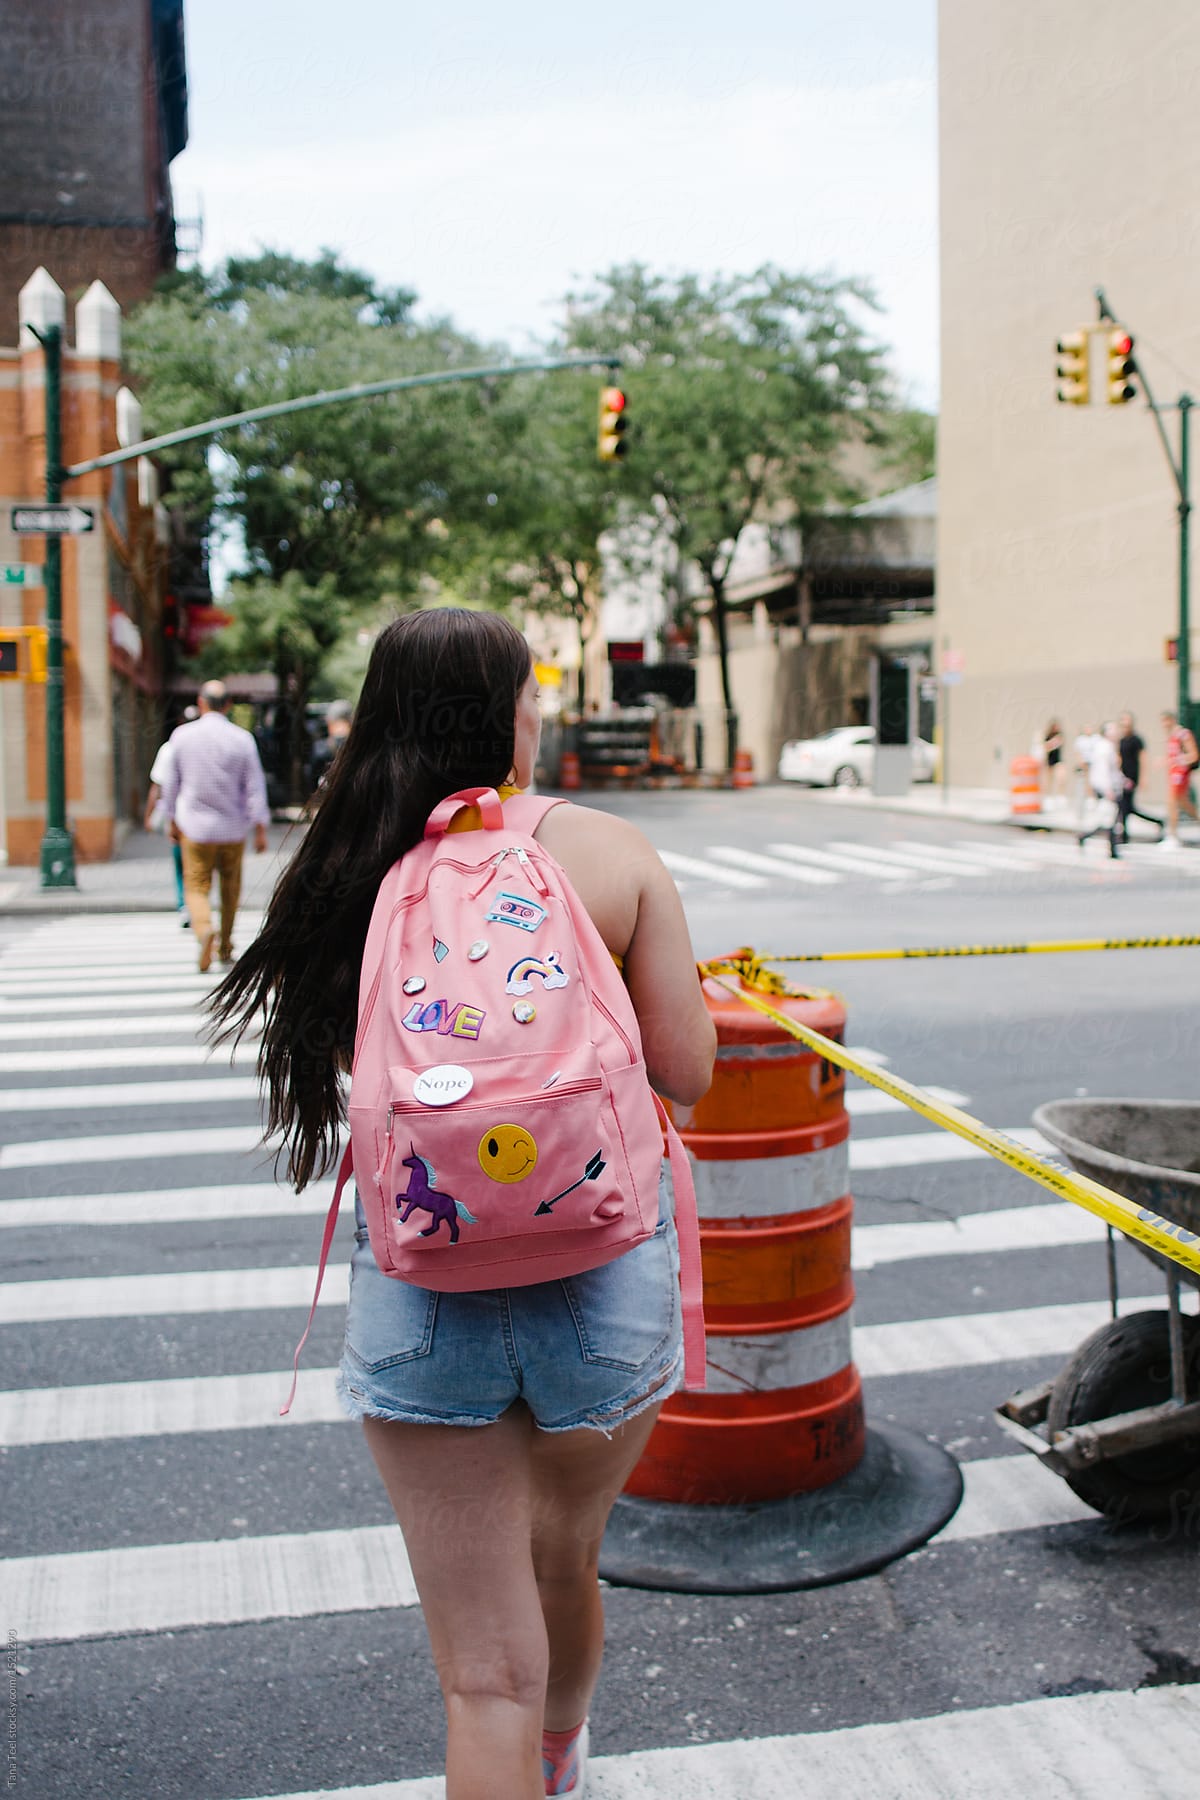 teenager wearing backpack explores NY city